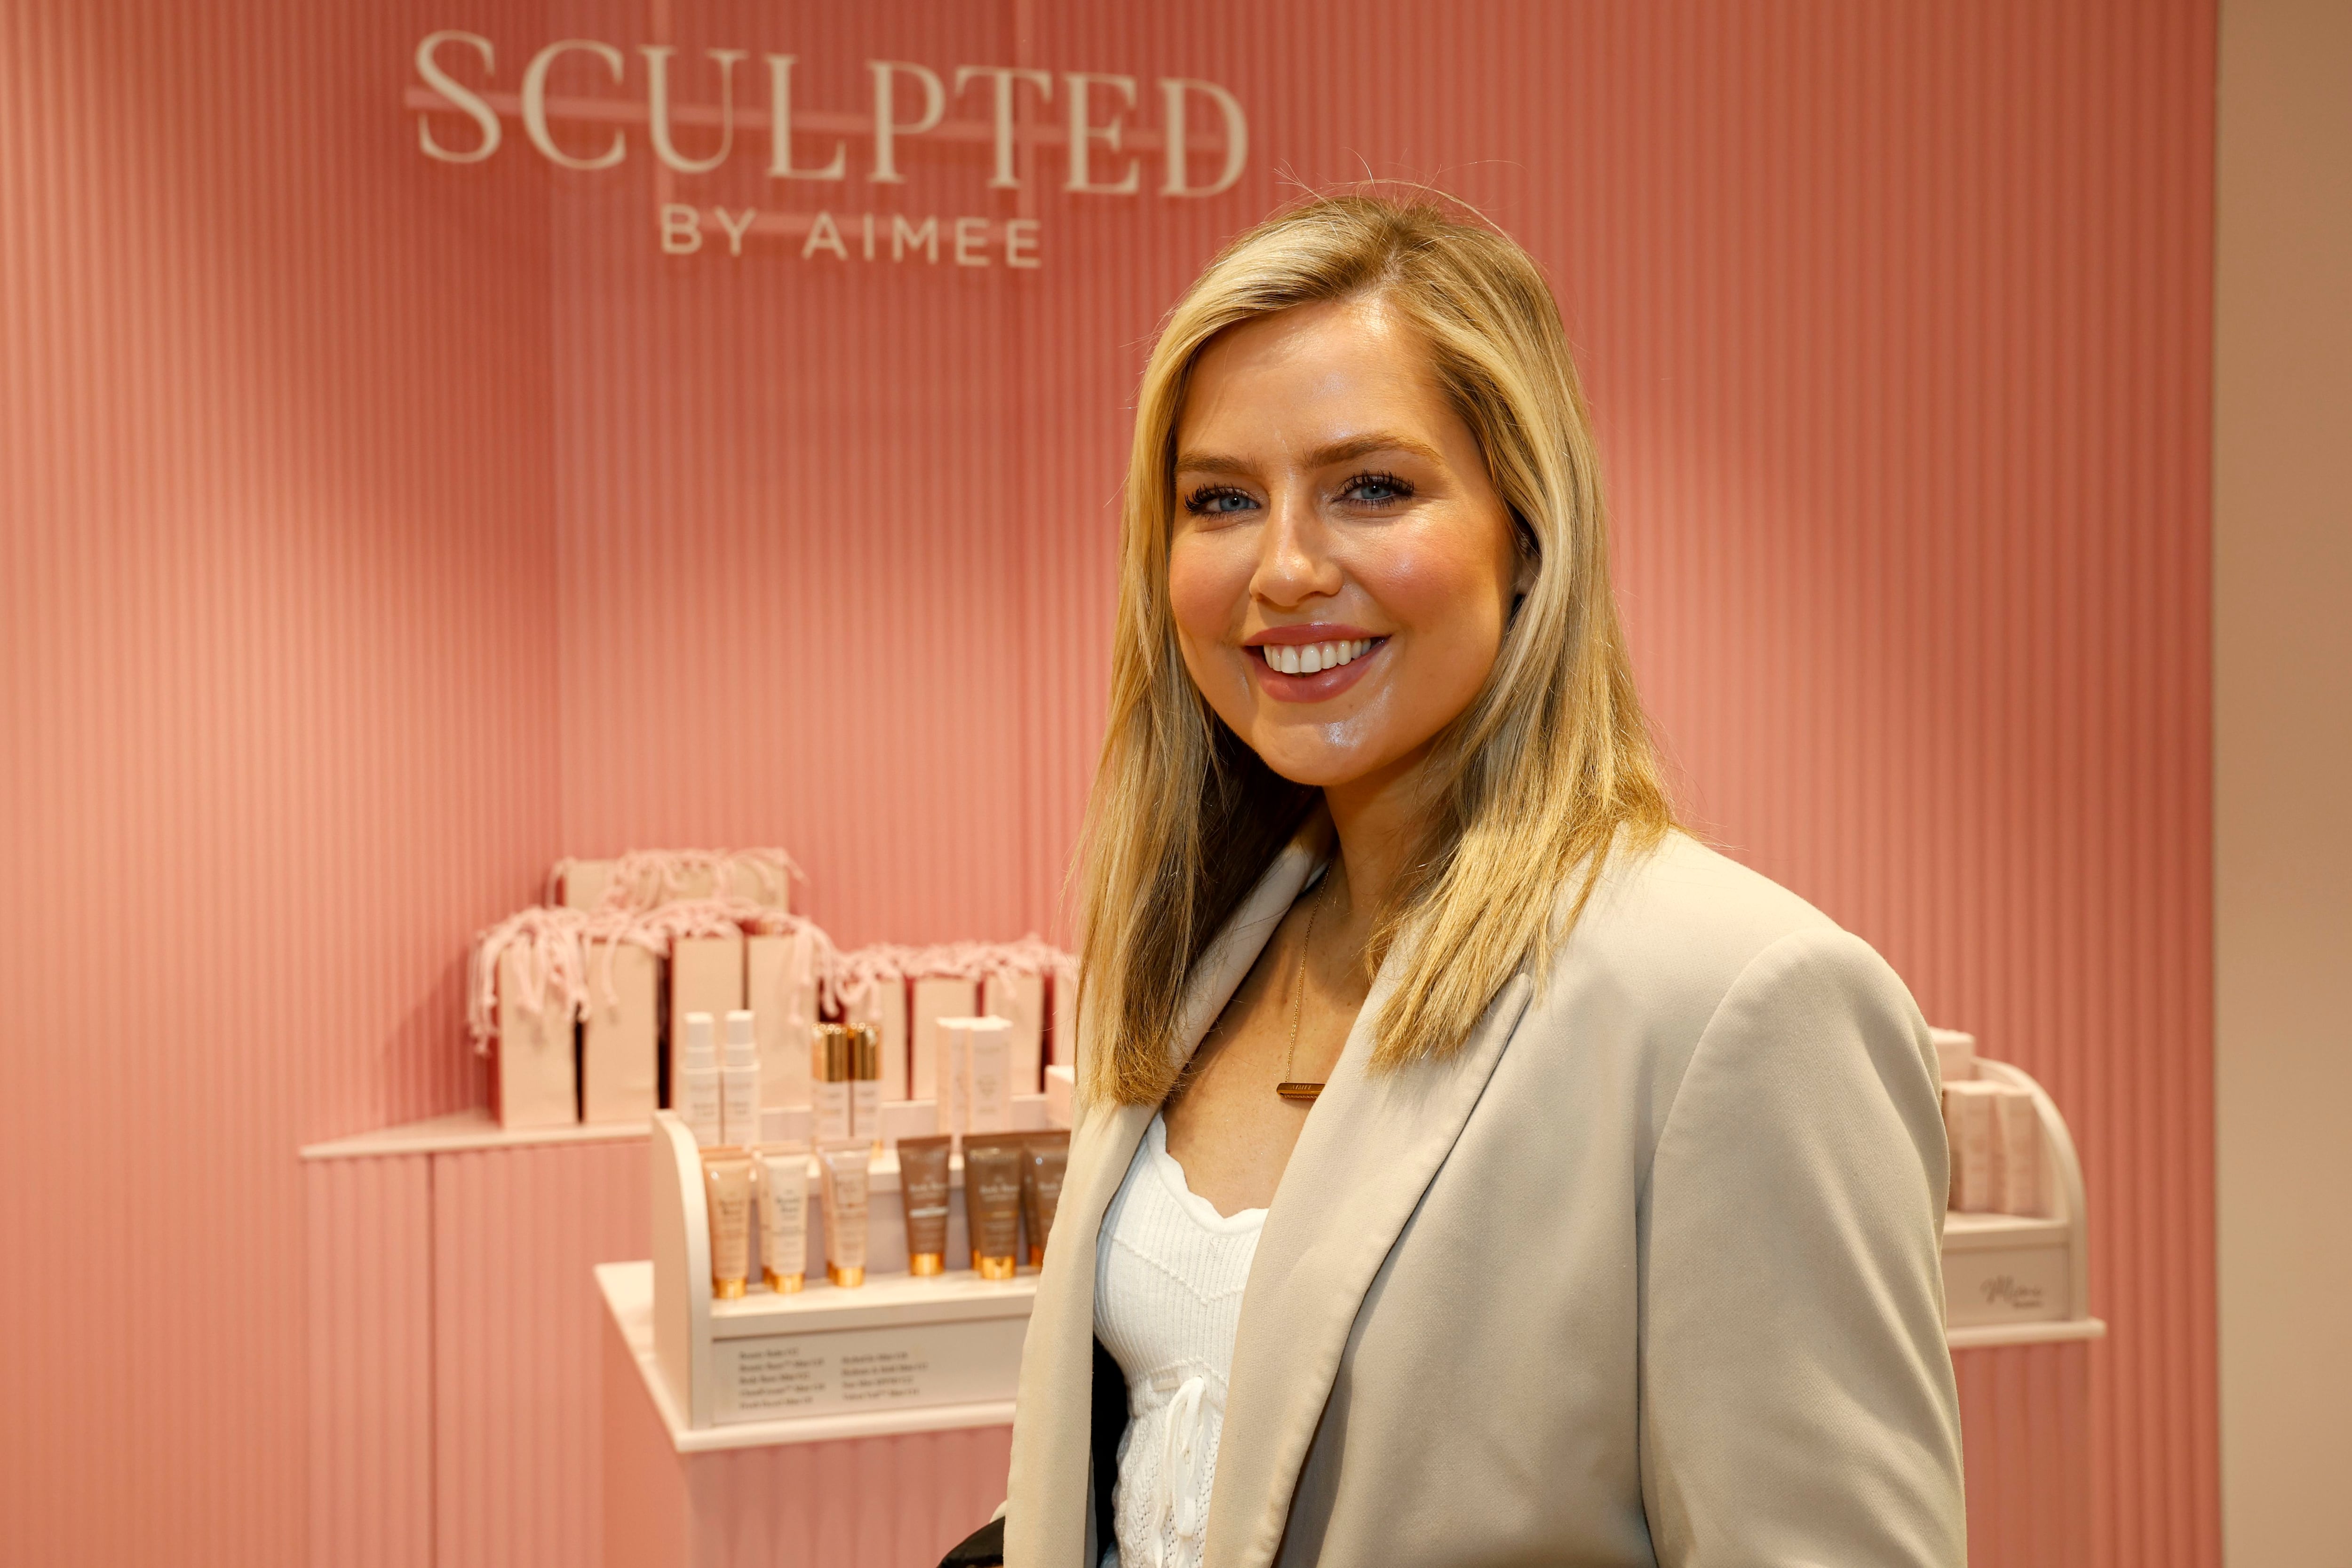 Making It Work: Sculpted Irish beauty brand is set to go global